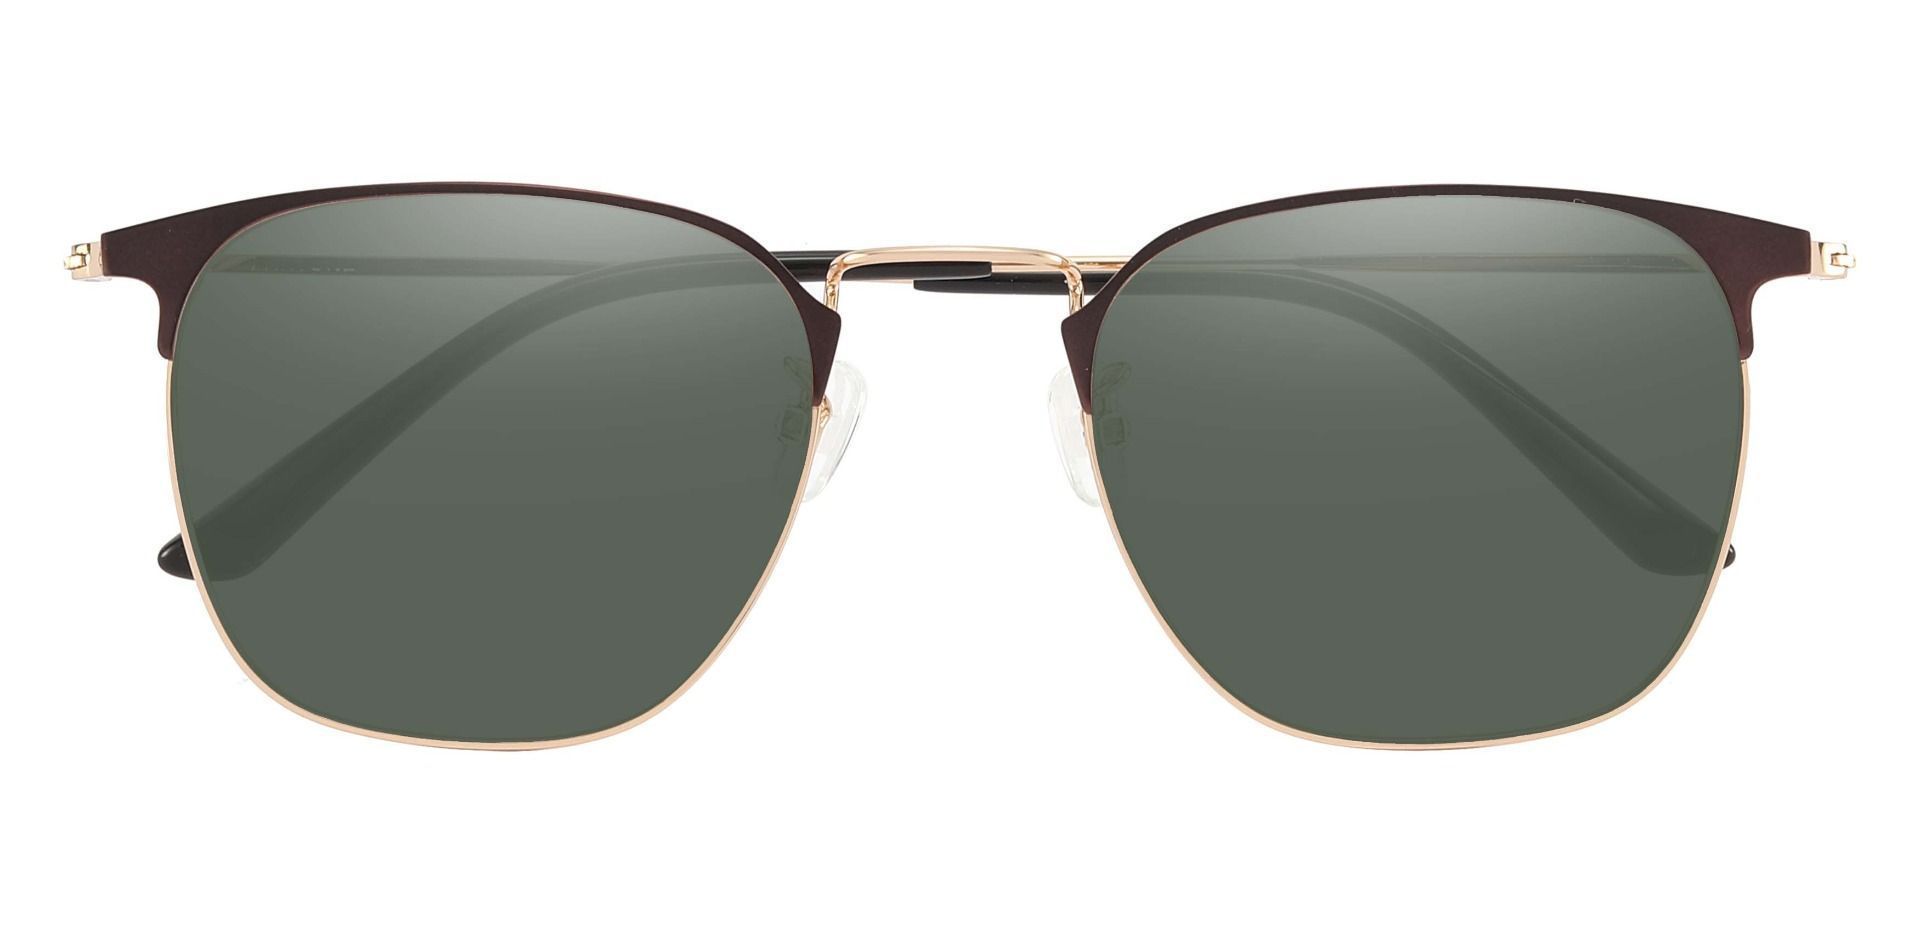 Nichols Browline Non-Rx Sunglasses - Brown Frame With Green Lenses